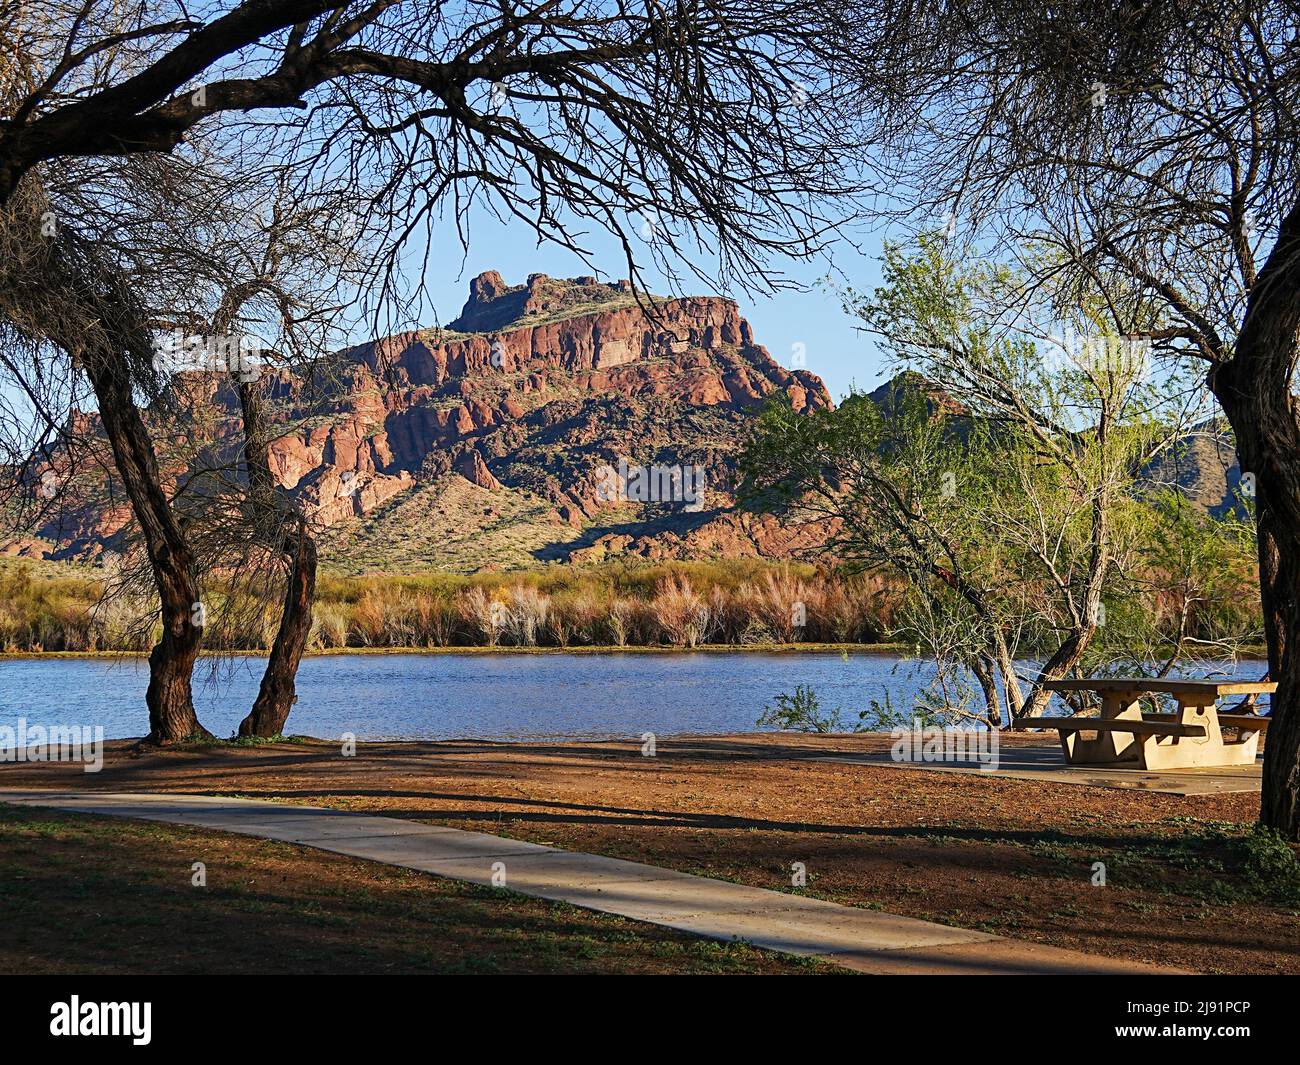 Red Mountain in Mesa, Arizona is framed by various desert bushes and trees that populate the banks of the Salt River Stock Photo